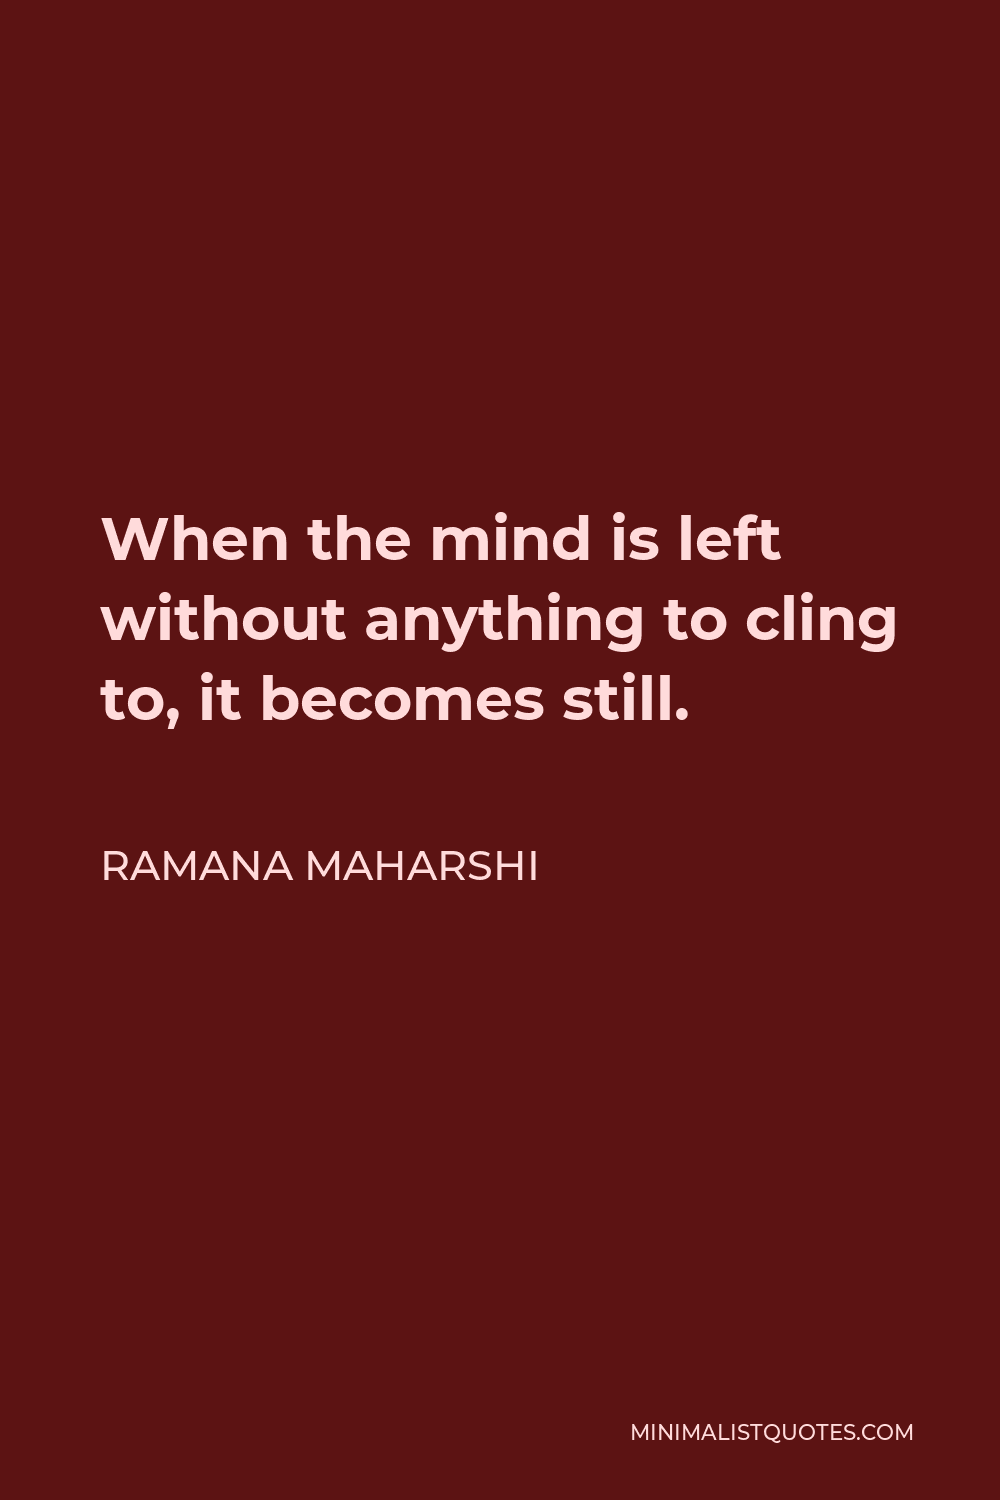 Ramana Maharshi Quote - When the mind is left without anything to cling to, it becomes still.